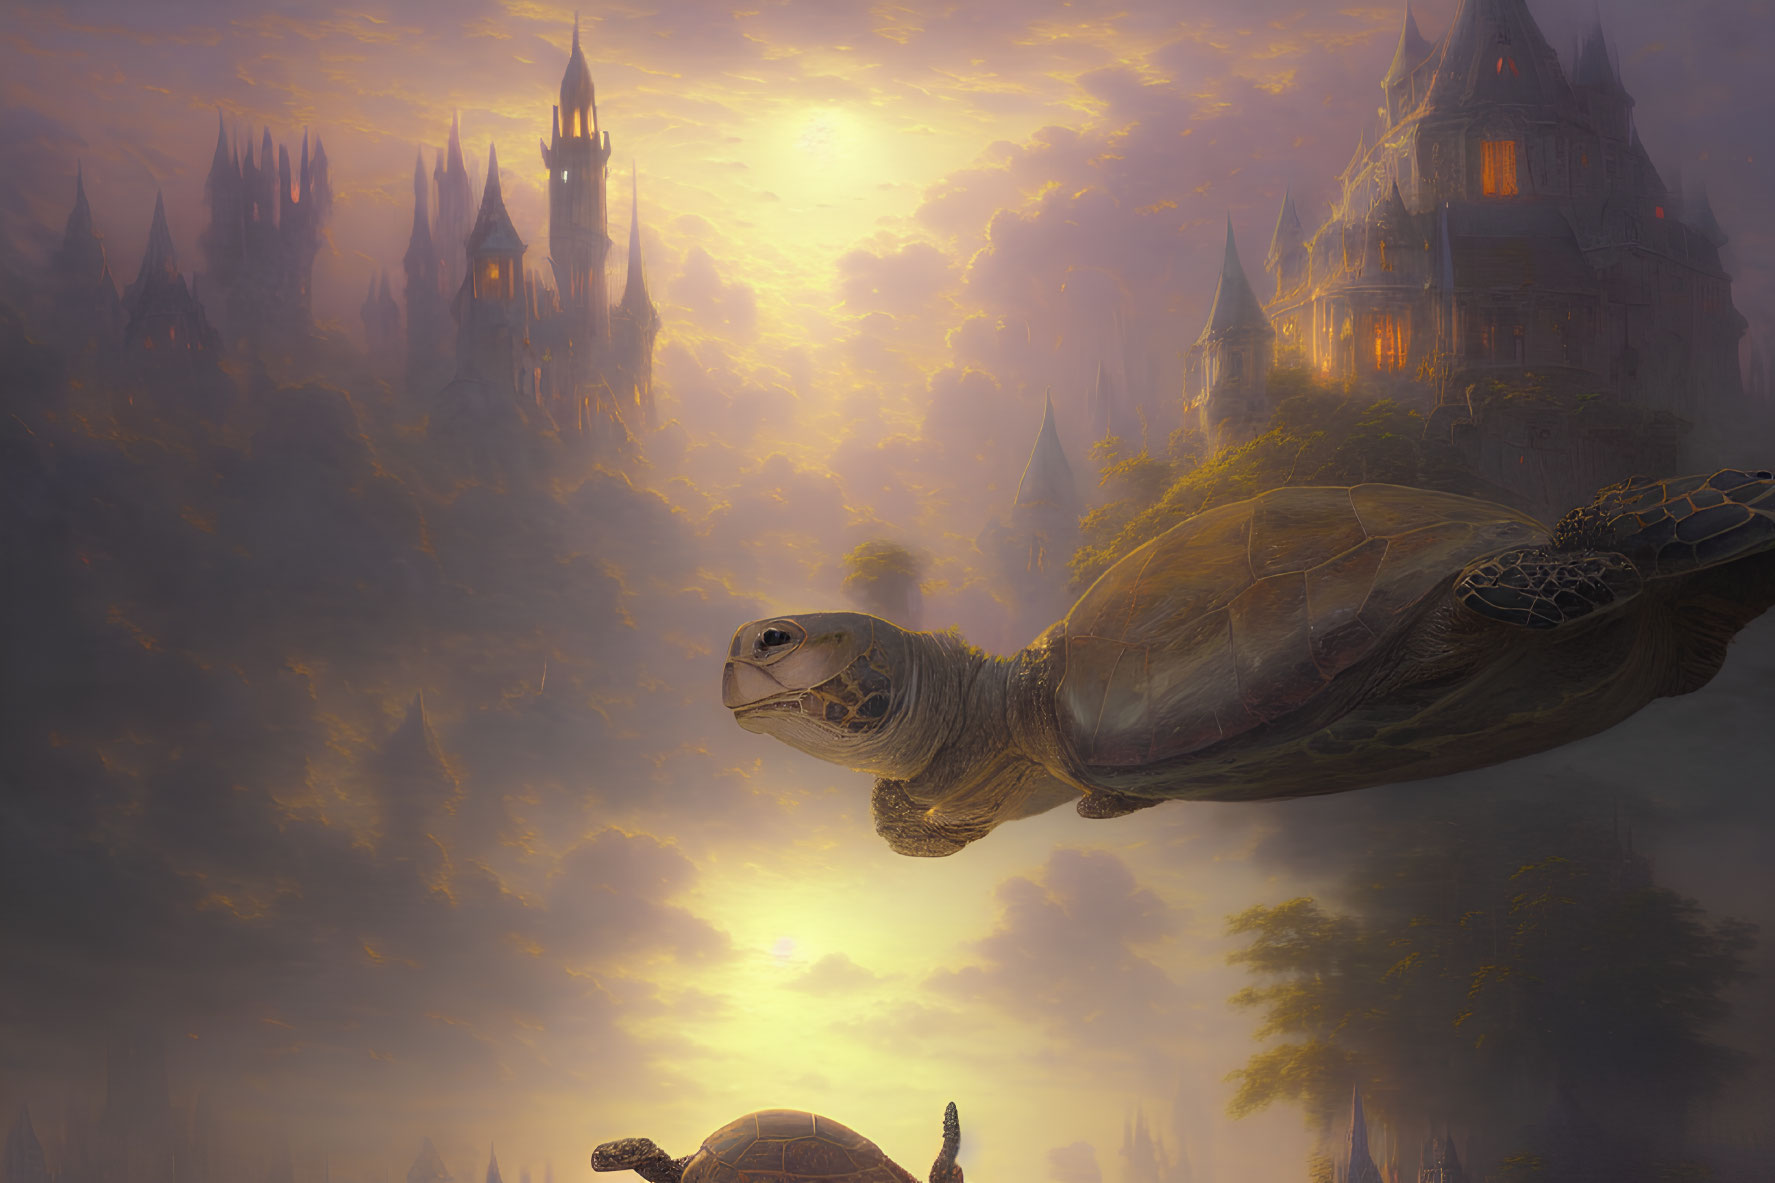 Giant flying turtles in misty forest with castles at sunset